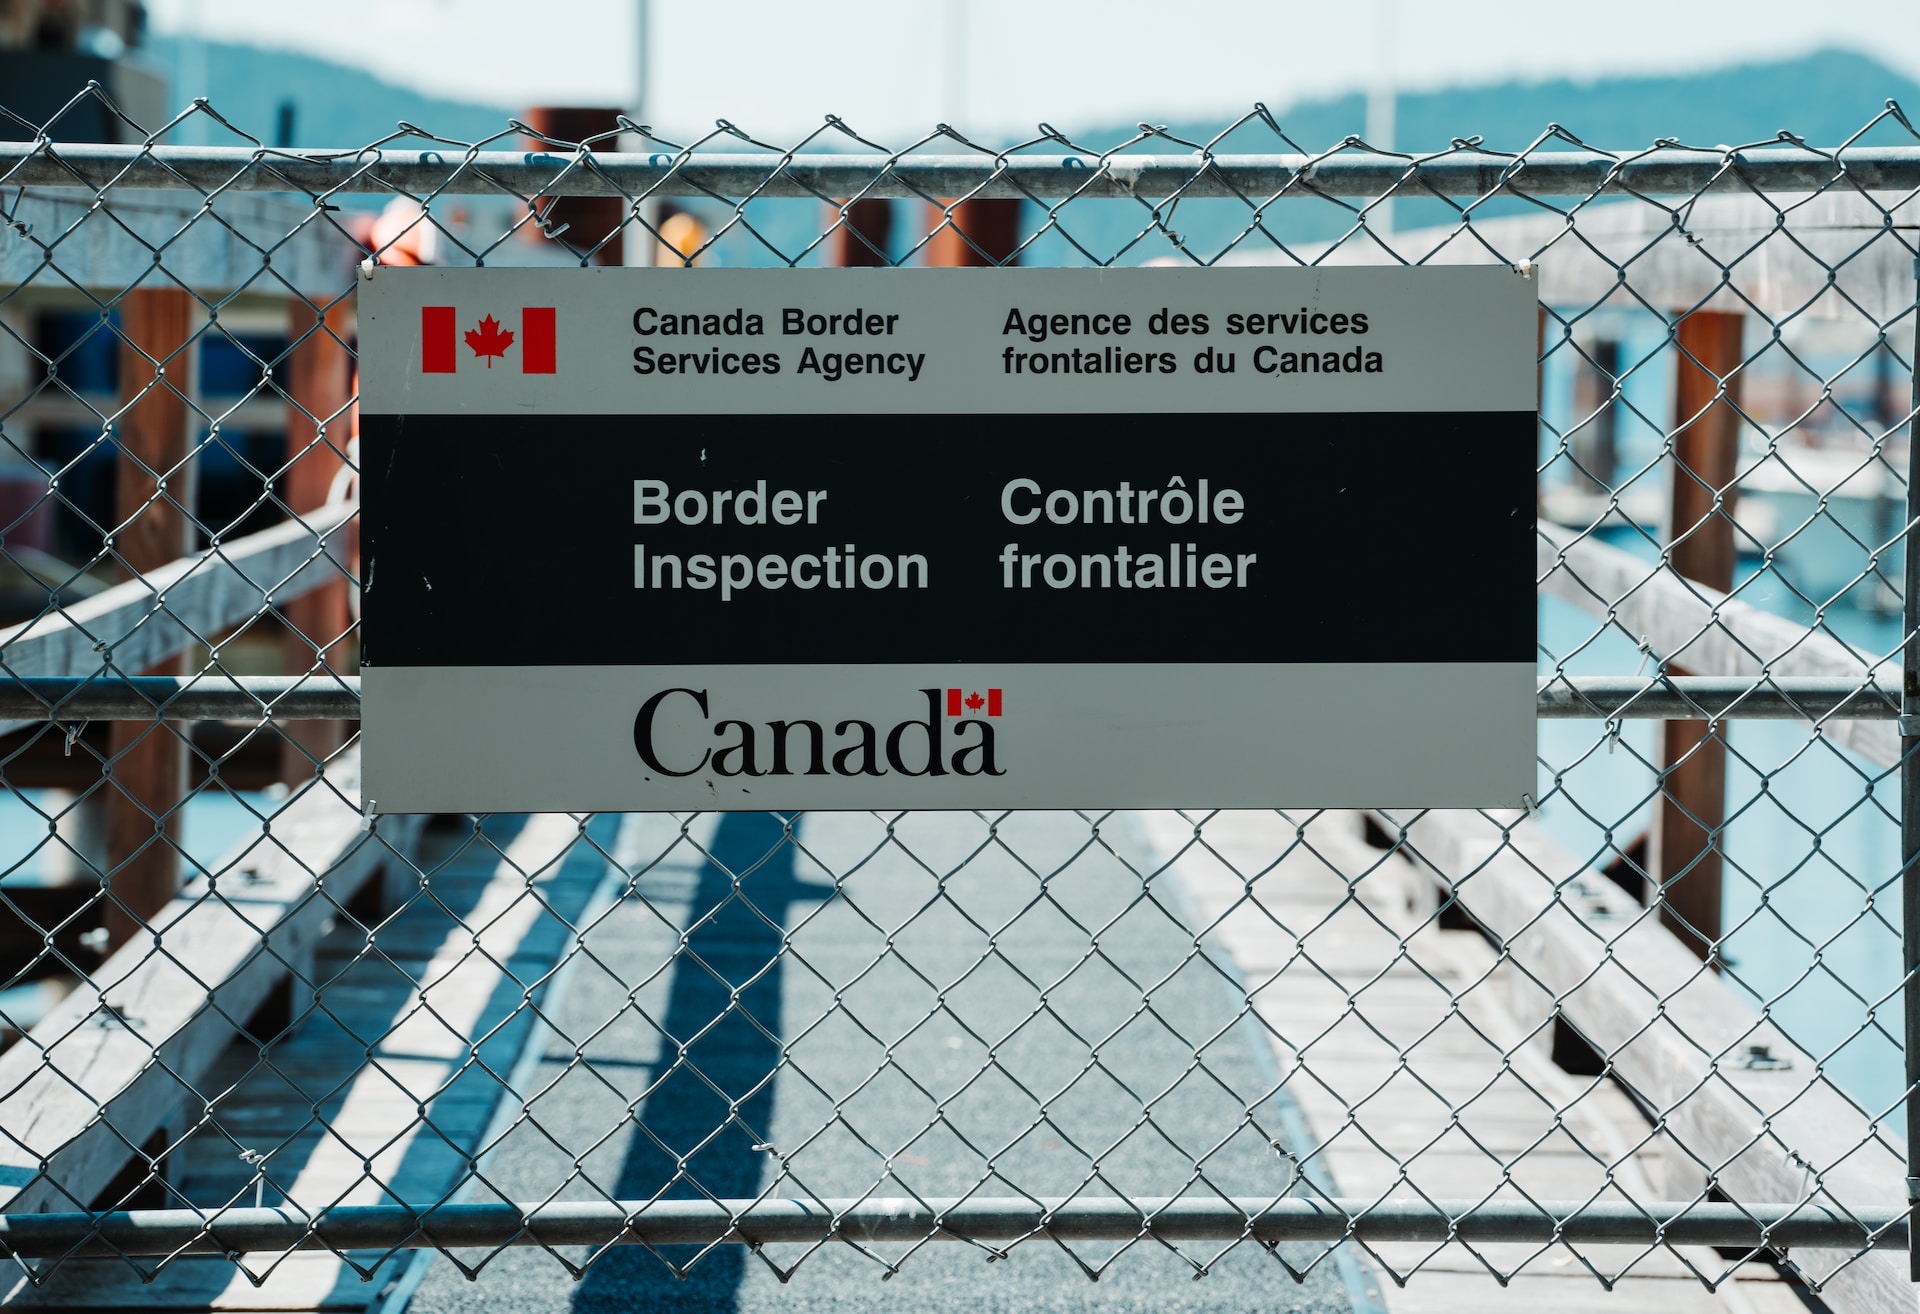 A sign on a fence that says 'Canada Border services Agency -- border inspection' and 'Agence des services frontaliers du Canada - Contrôle frontalier'